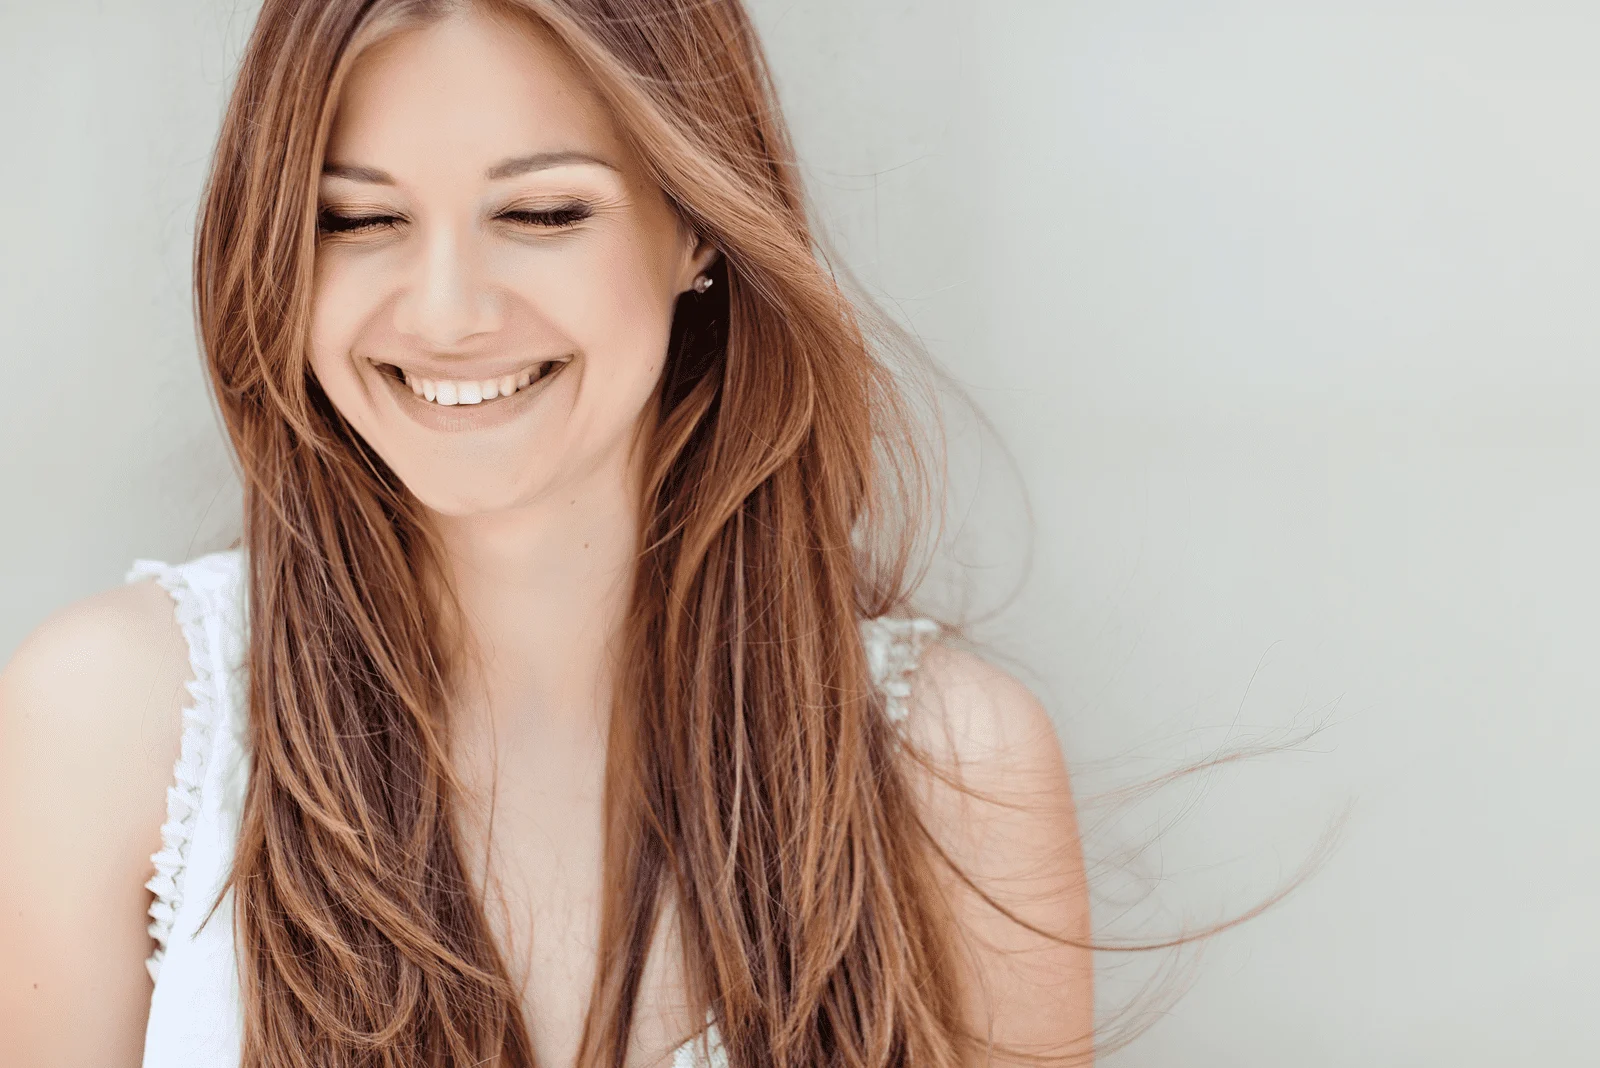 a smiling woman with long brown hair